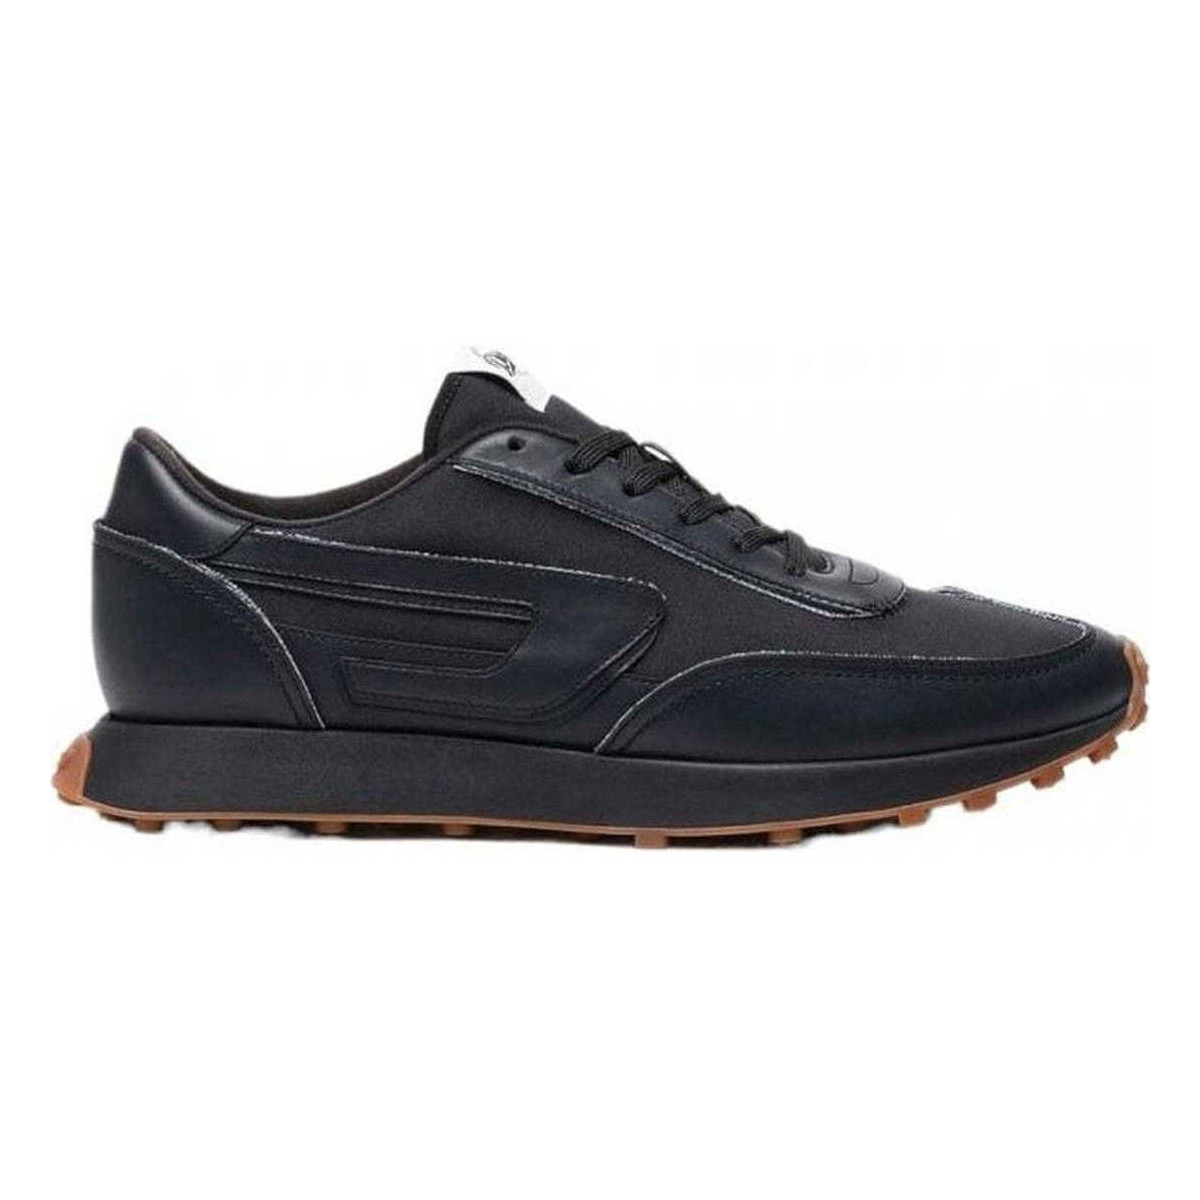 Chaussures Homme Baskets basses Diesel s-racer lc trainers Noir